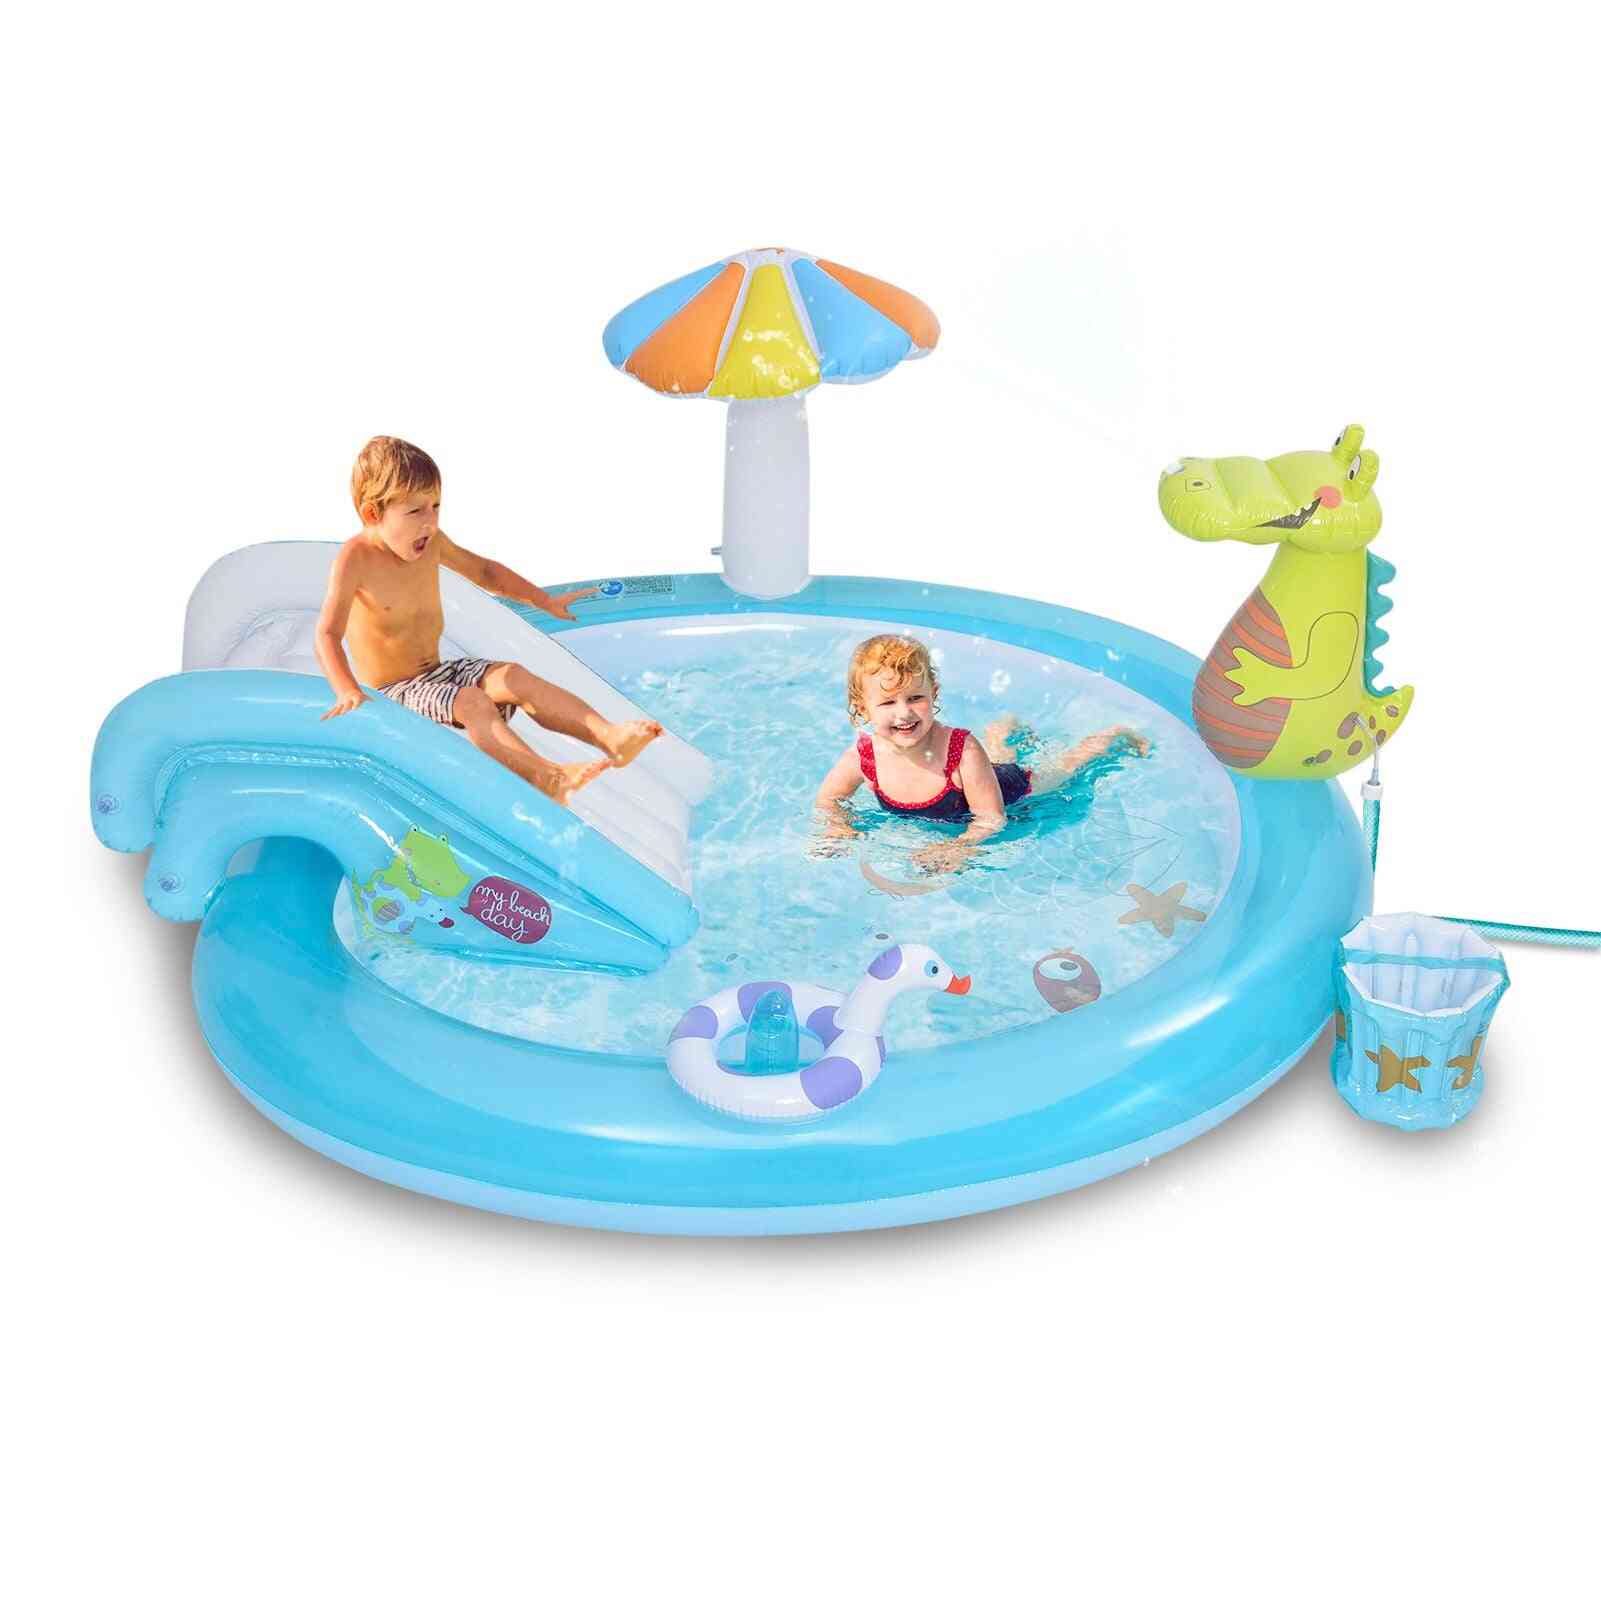 Inflatable Play Center- Blow Up Swimming, Water Fun Pool